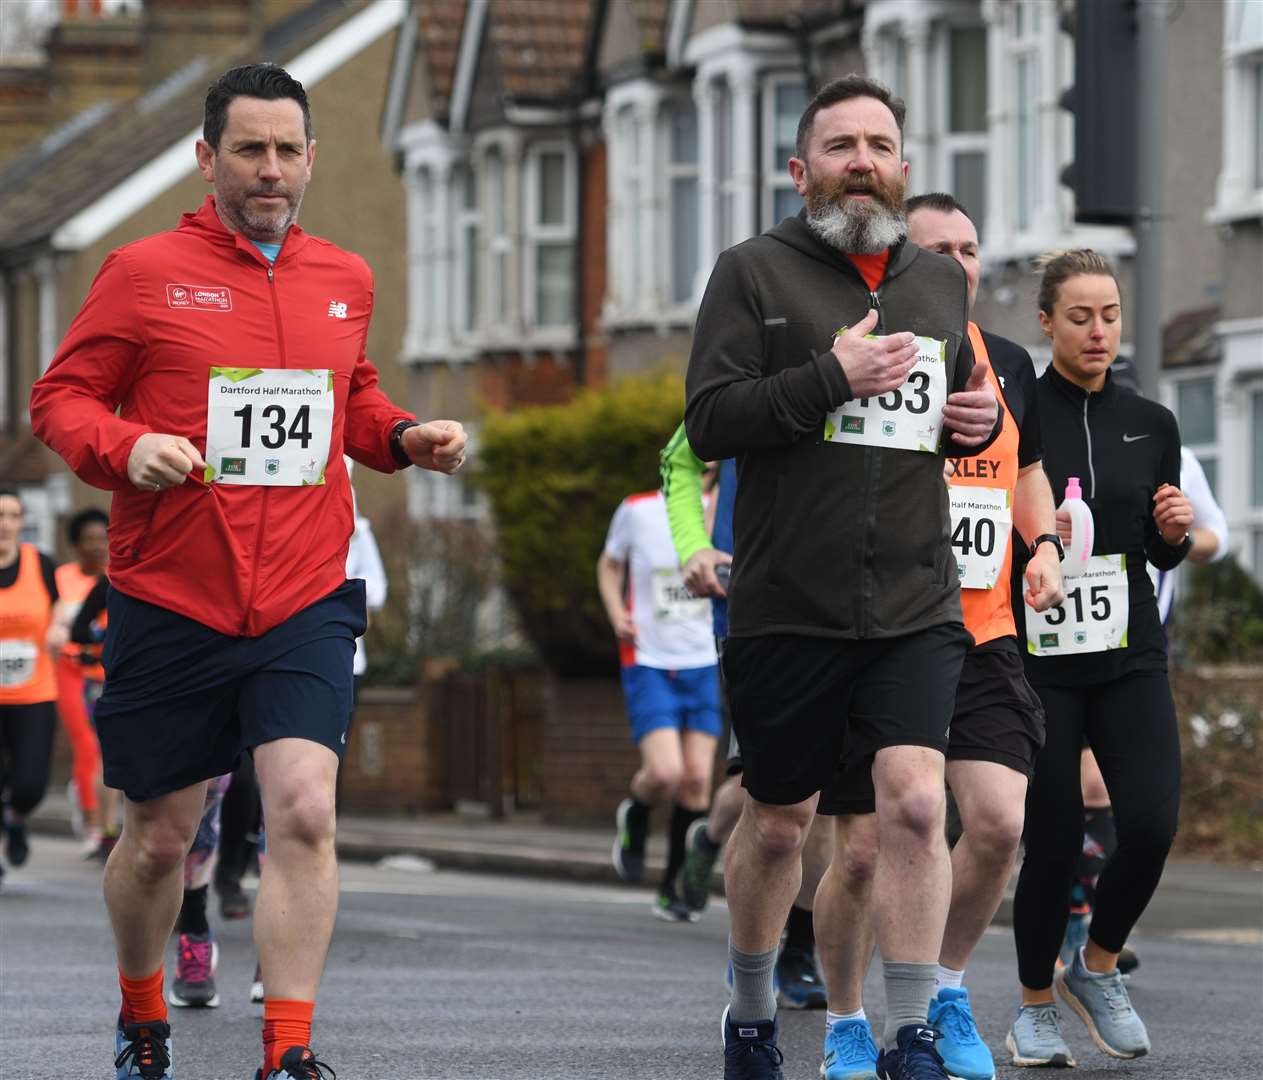 More than 400 people took part in Sunday's race. Picture: Barry Goodwin (55422144)